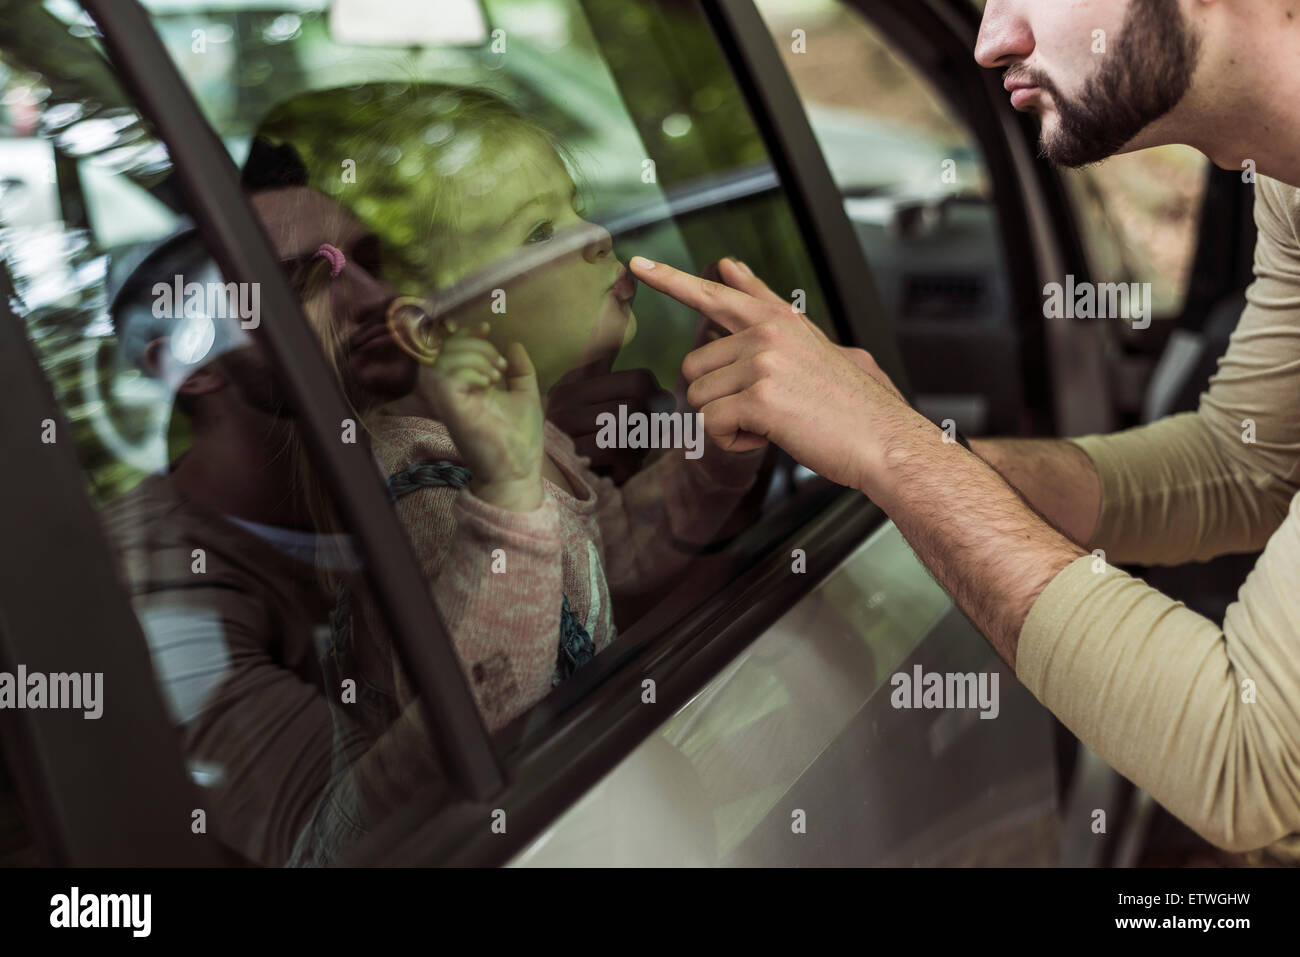 Father touching girl's mouth behind car window Stock Photo